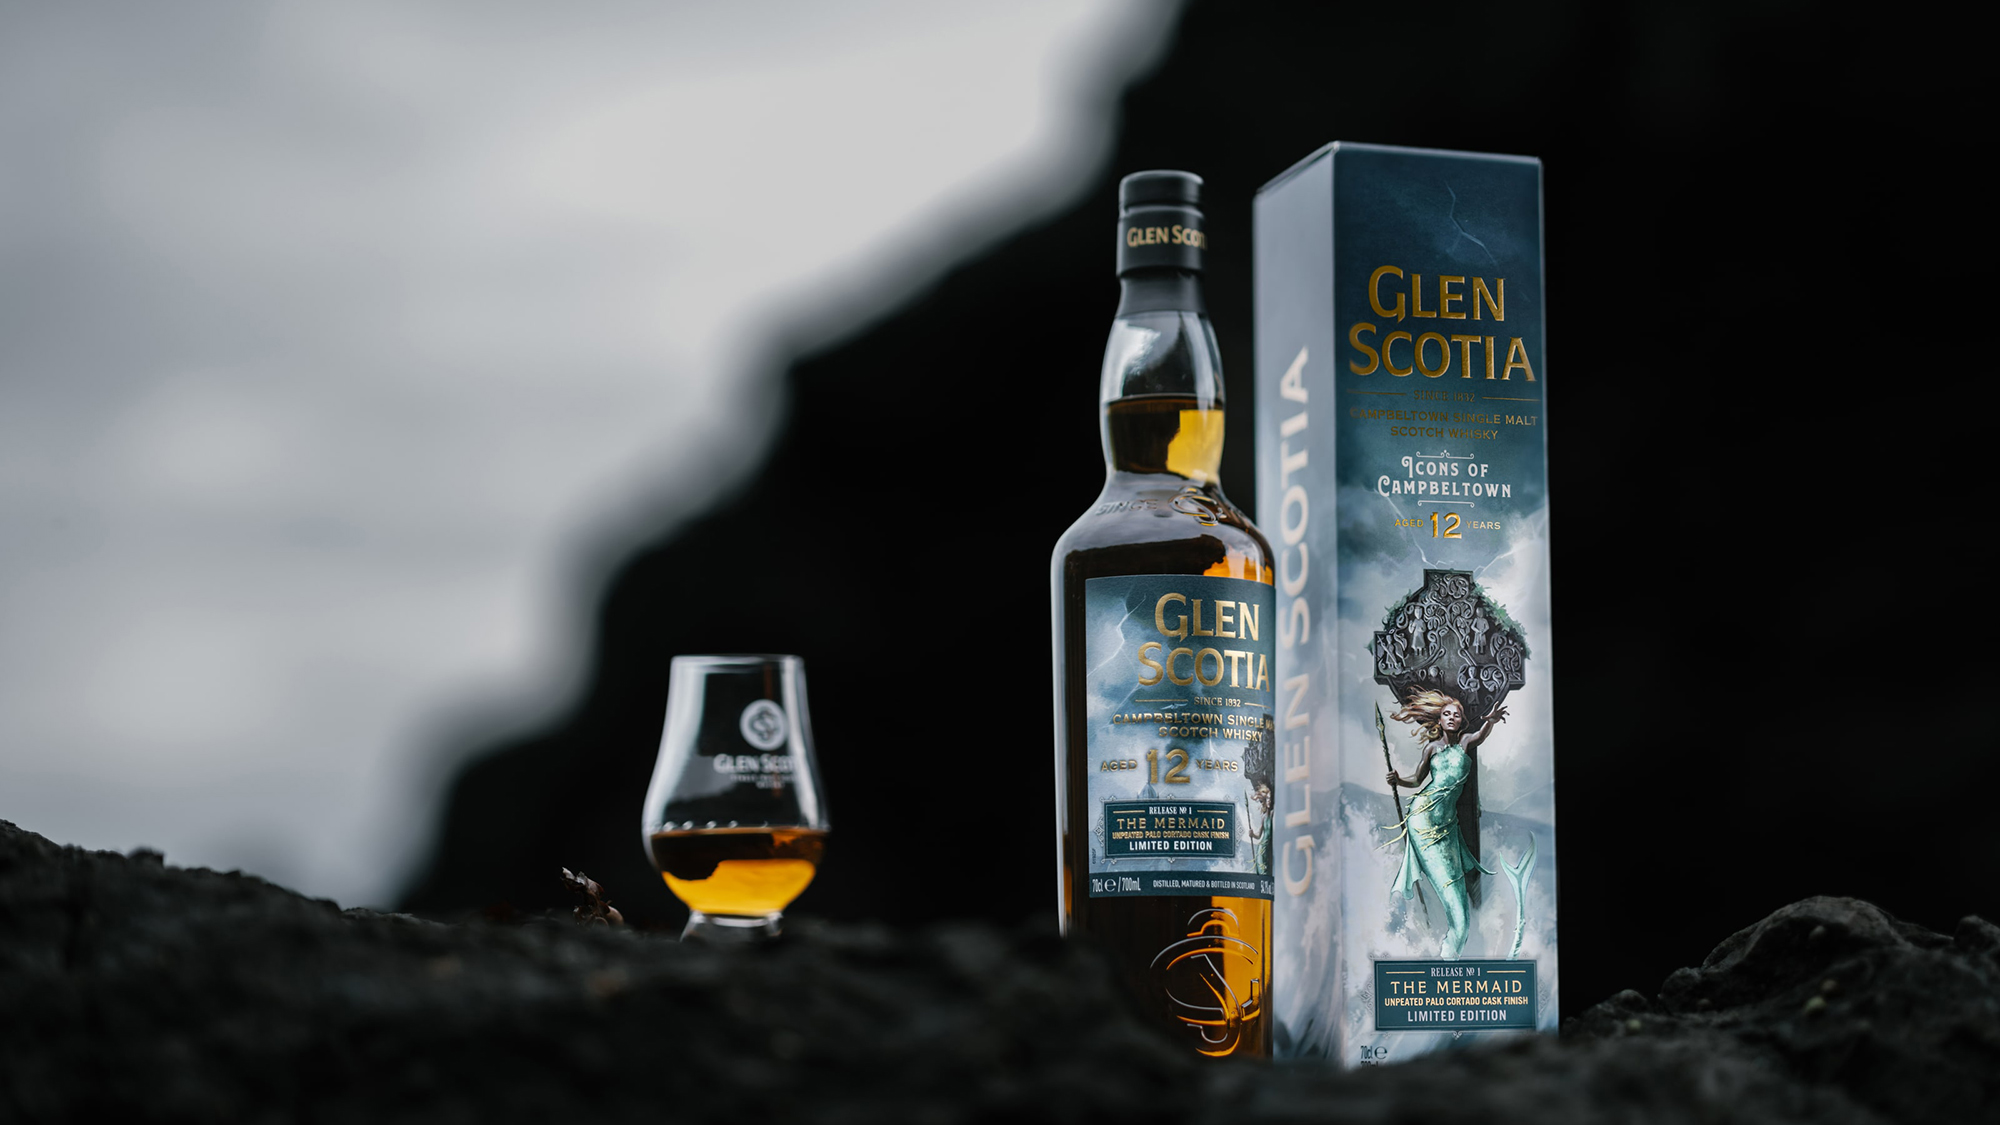 Glen Scotia Debuts The Icons of Campbeltown With “The Mermaid”